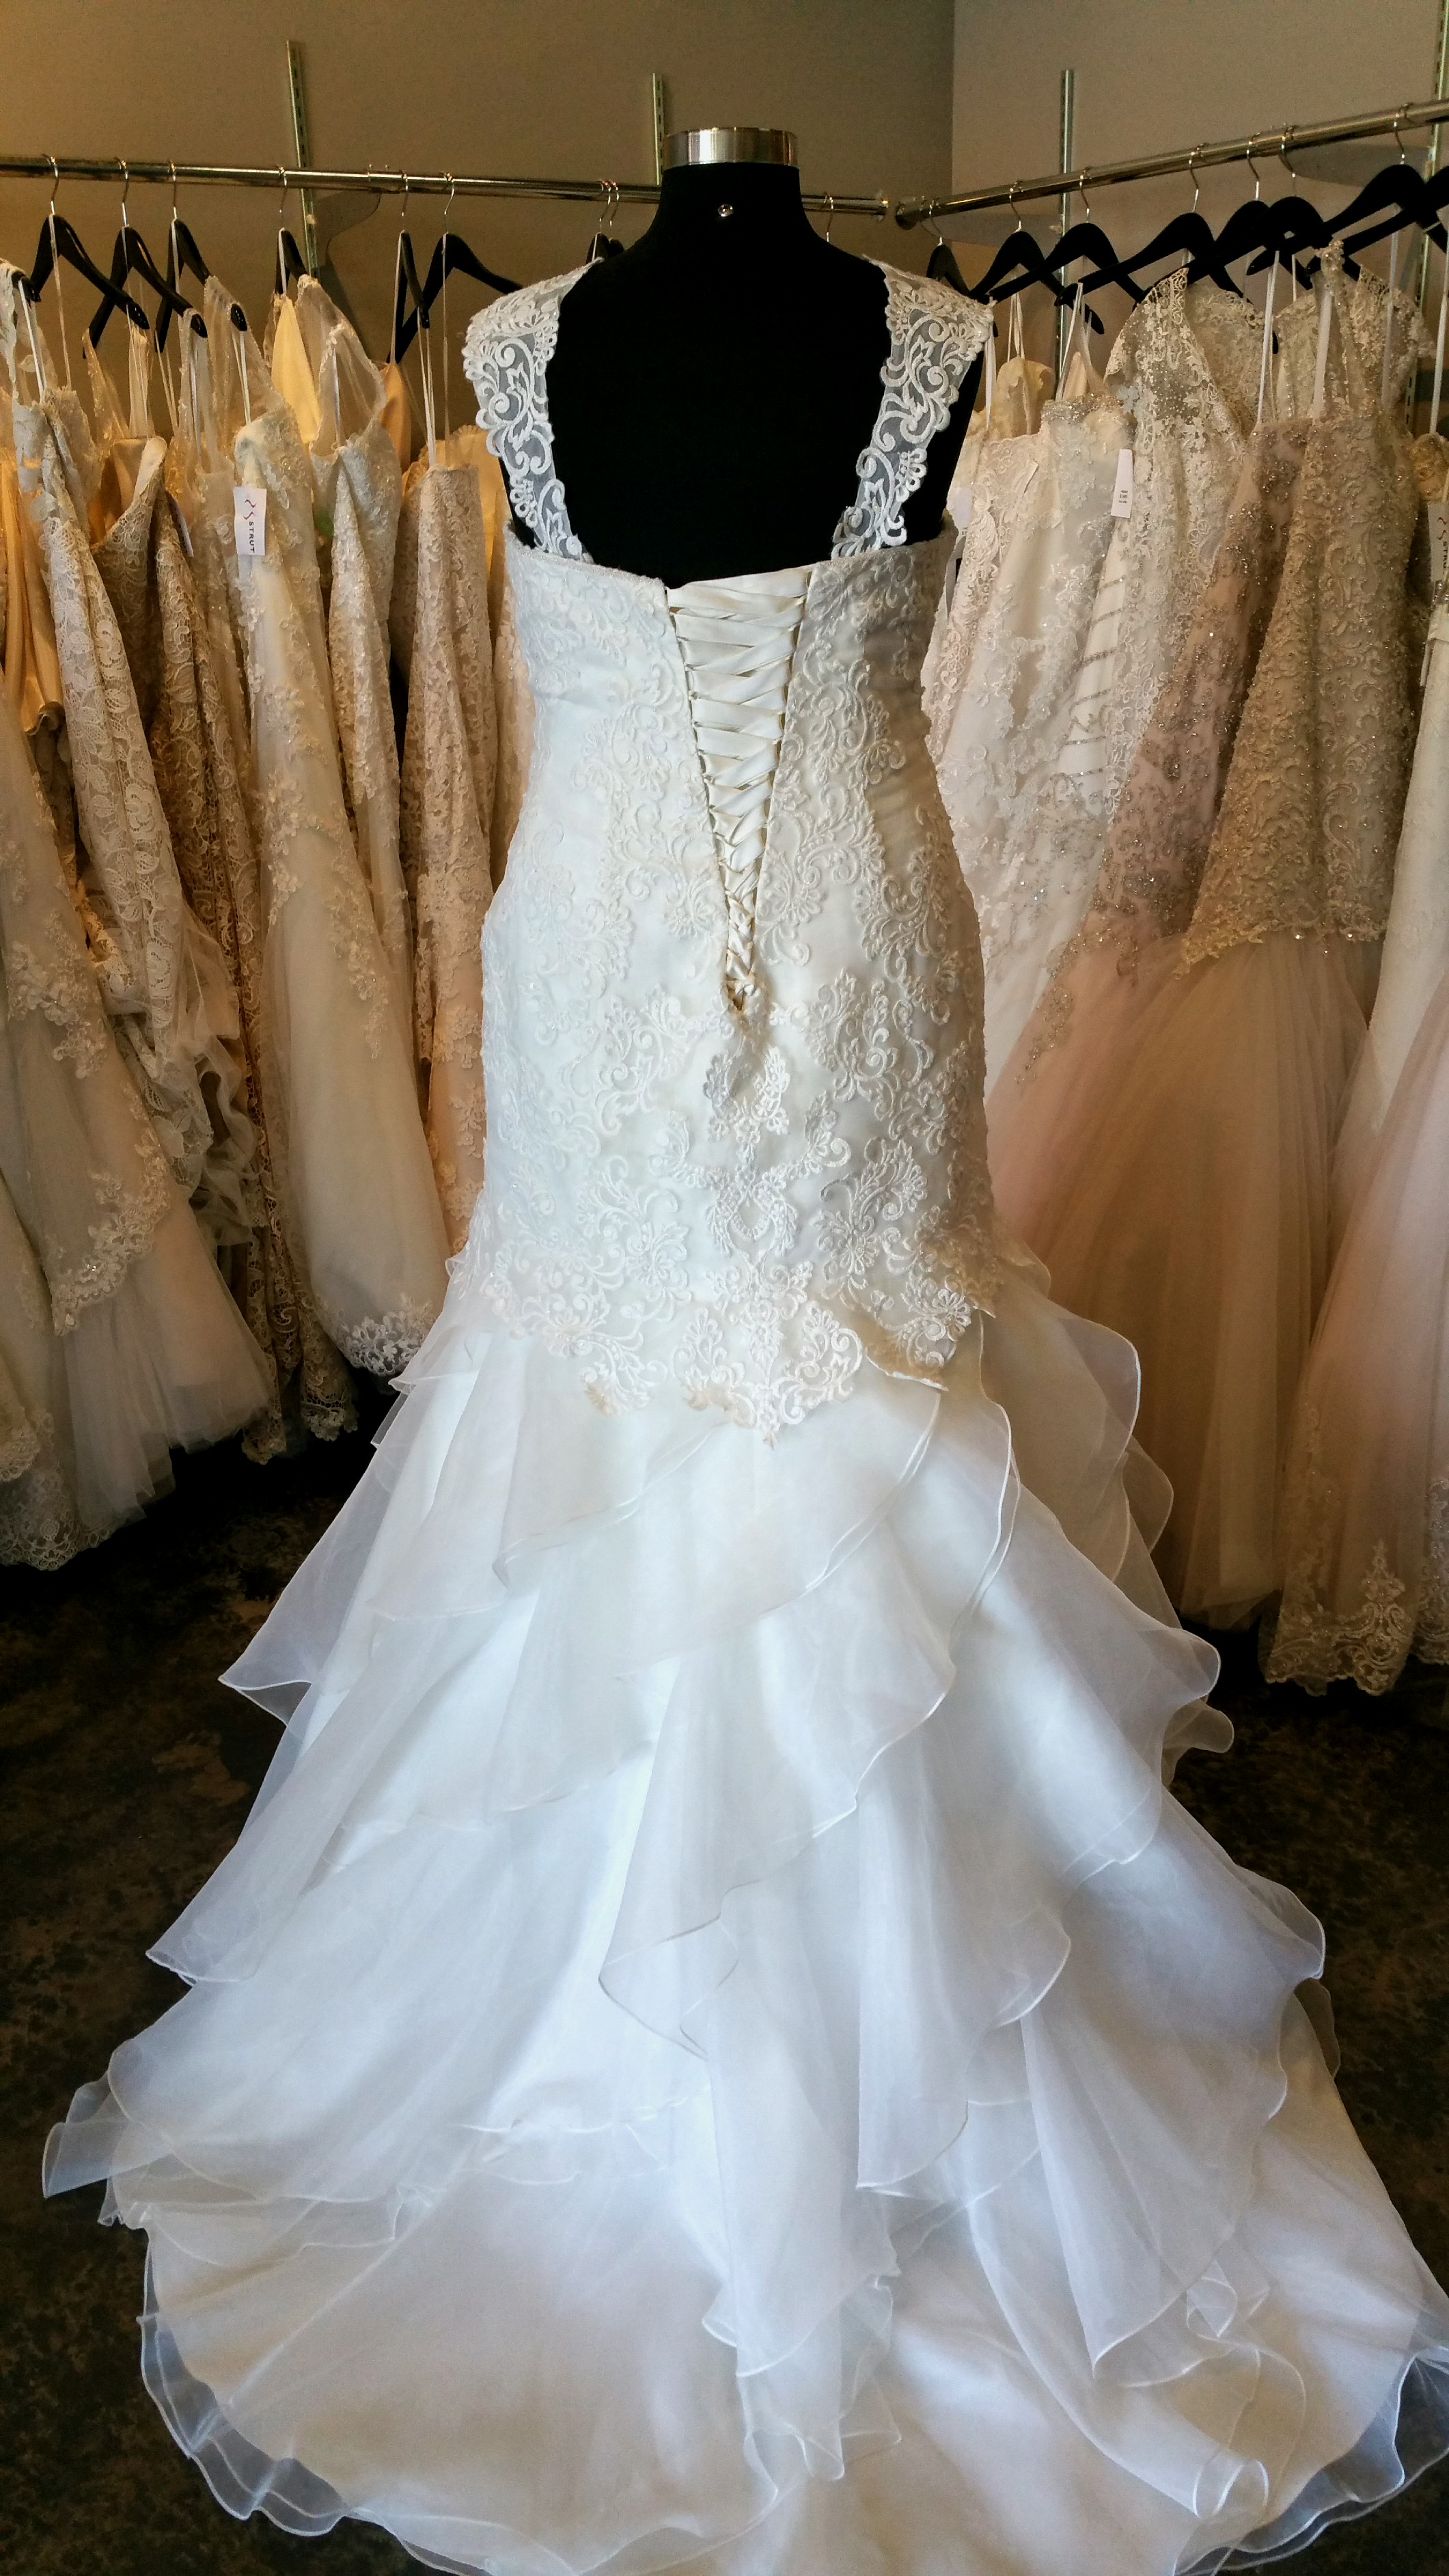 NEW Lace and Ruffle  Trumpet Wedding  Gown  Strut Bridal  Salon